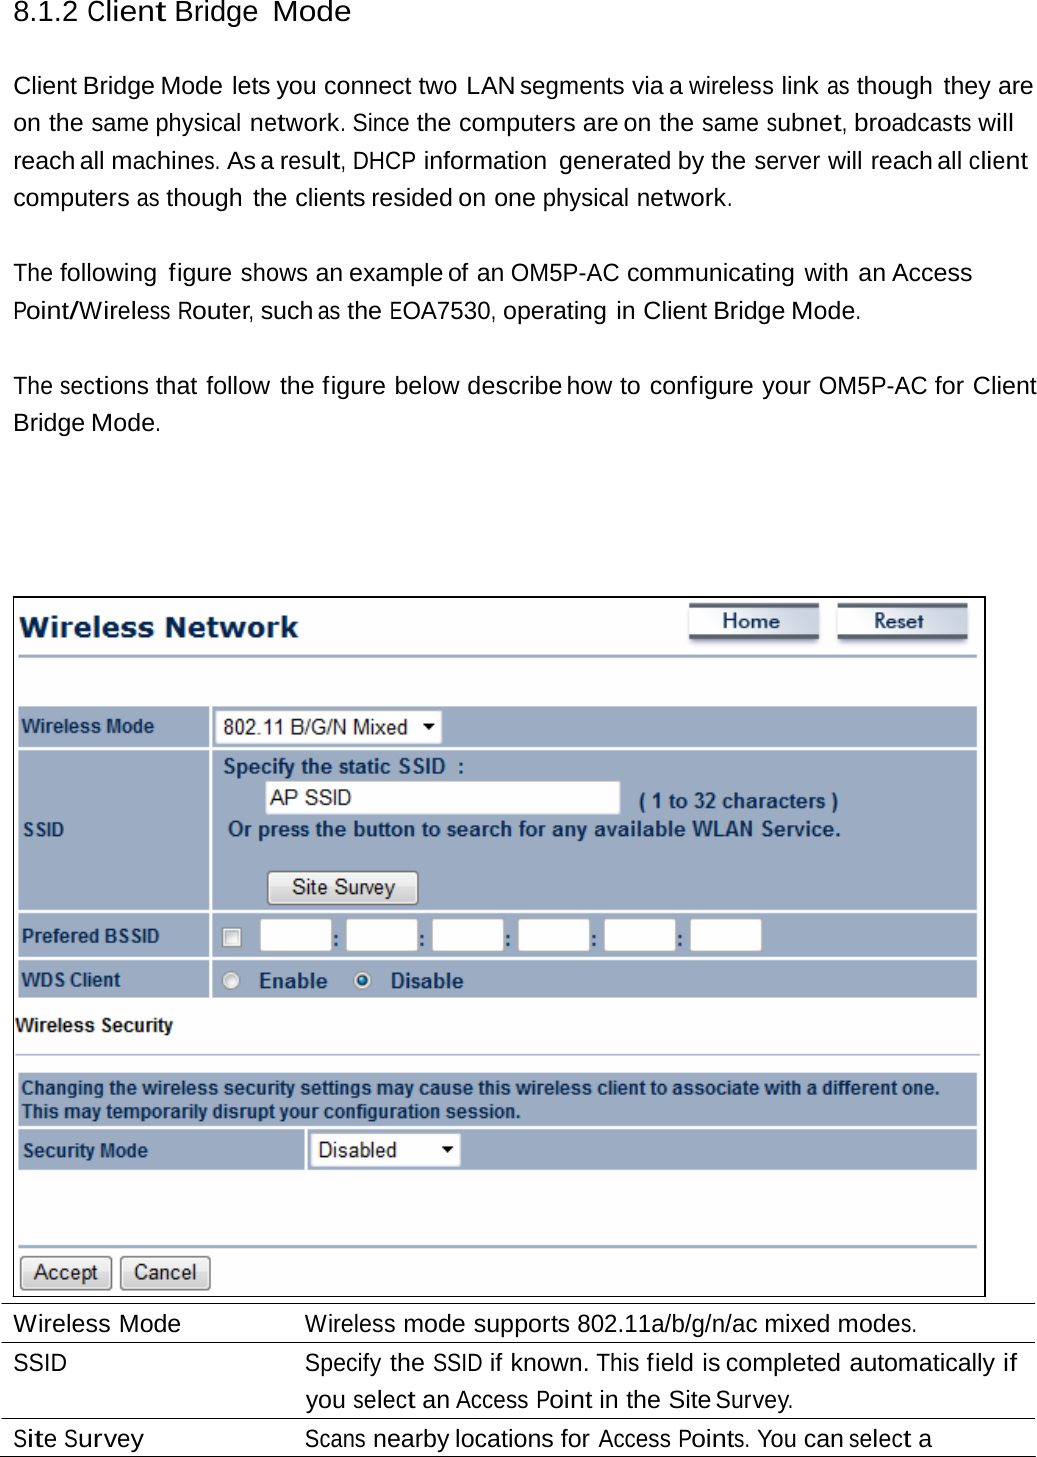 8.1.2 Client Bridge Mode Client Bridge Mode lets you connect two LAN segments via a wireless link as though they are on the same physical network. Since the computers are on the same subnet, broadcasts will reach all machines. As a result, DHCP information generated by the server will reach all client computers as though the clients resided on one physical network. The following figure shows an example of an OM5P-AC communicating with an Access Point/Wireless Router, such as the EOA7530, operating in Client Bridge Mode. The sections that follow the figure below describe how  to  configure  your OM5P-AC for Client Bridge Mode. Wireless Mode  Wireless mode supports 802.11a/b/g/n/ac mixed modes. SSID Specify the SSID if known. This field is completed automatically if you select an Access Point in the Site Survey. Site Survey Scans nearby locations for Access Points. You can select a 